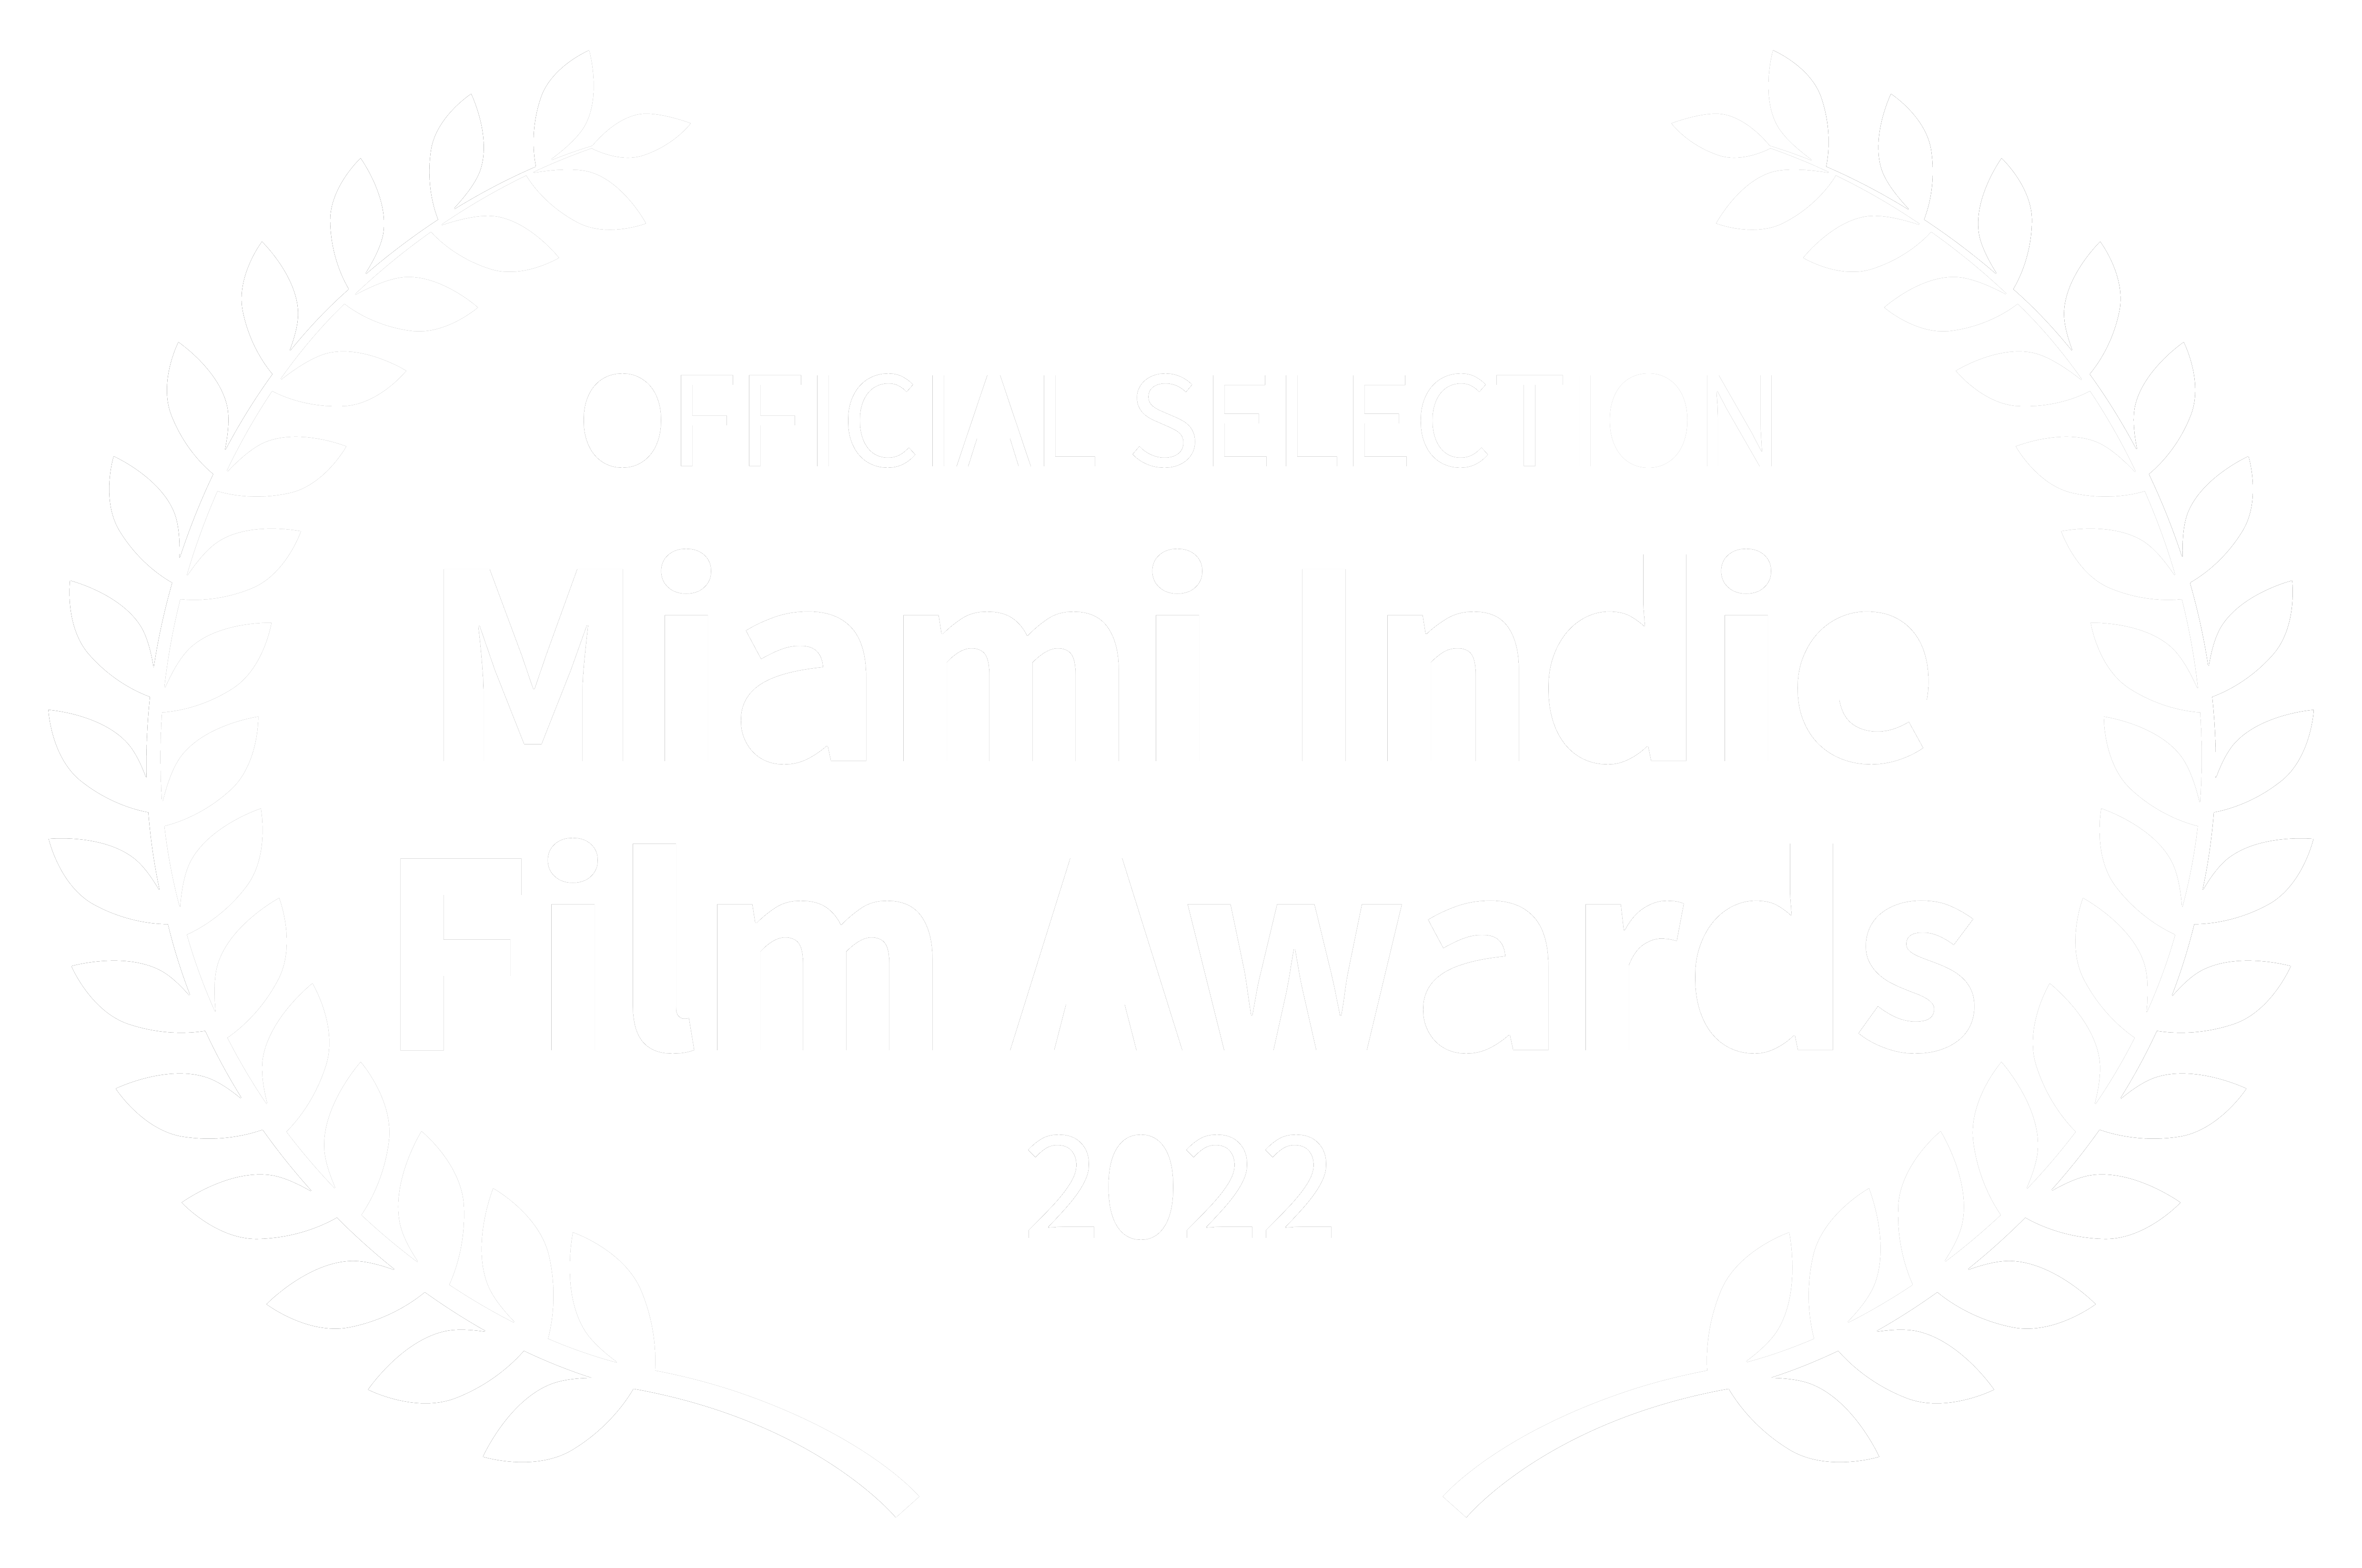 OFFICIAL SELECTION MiamiIndie Film Awards 2022